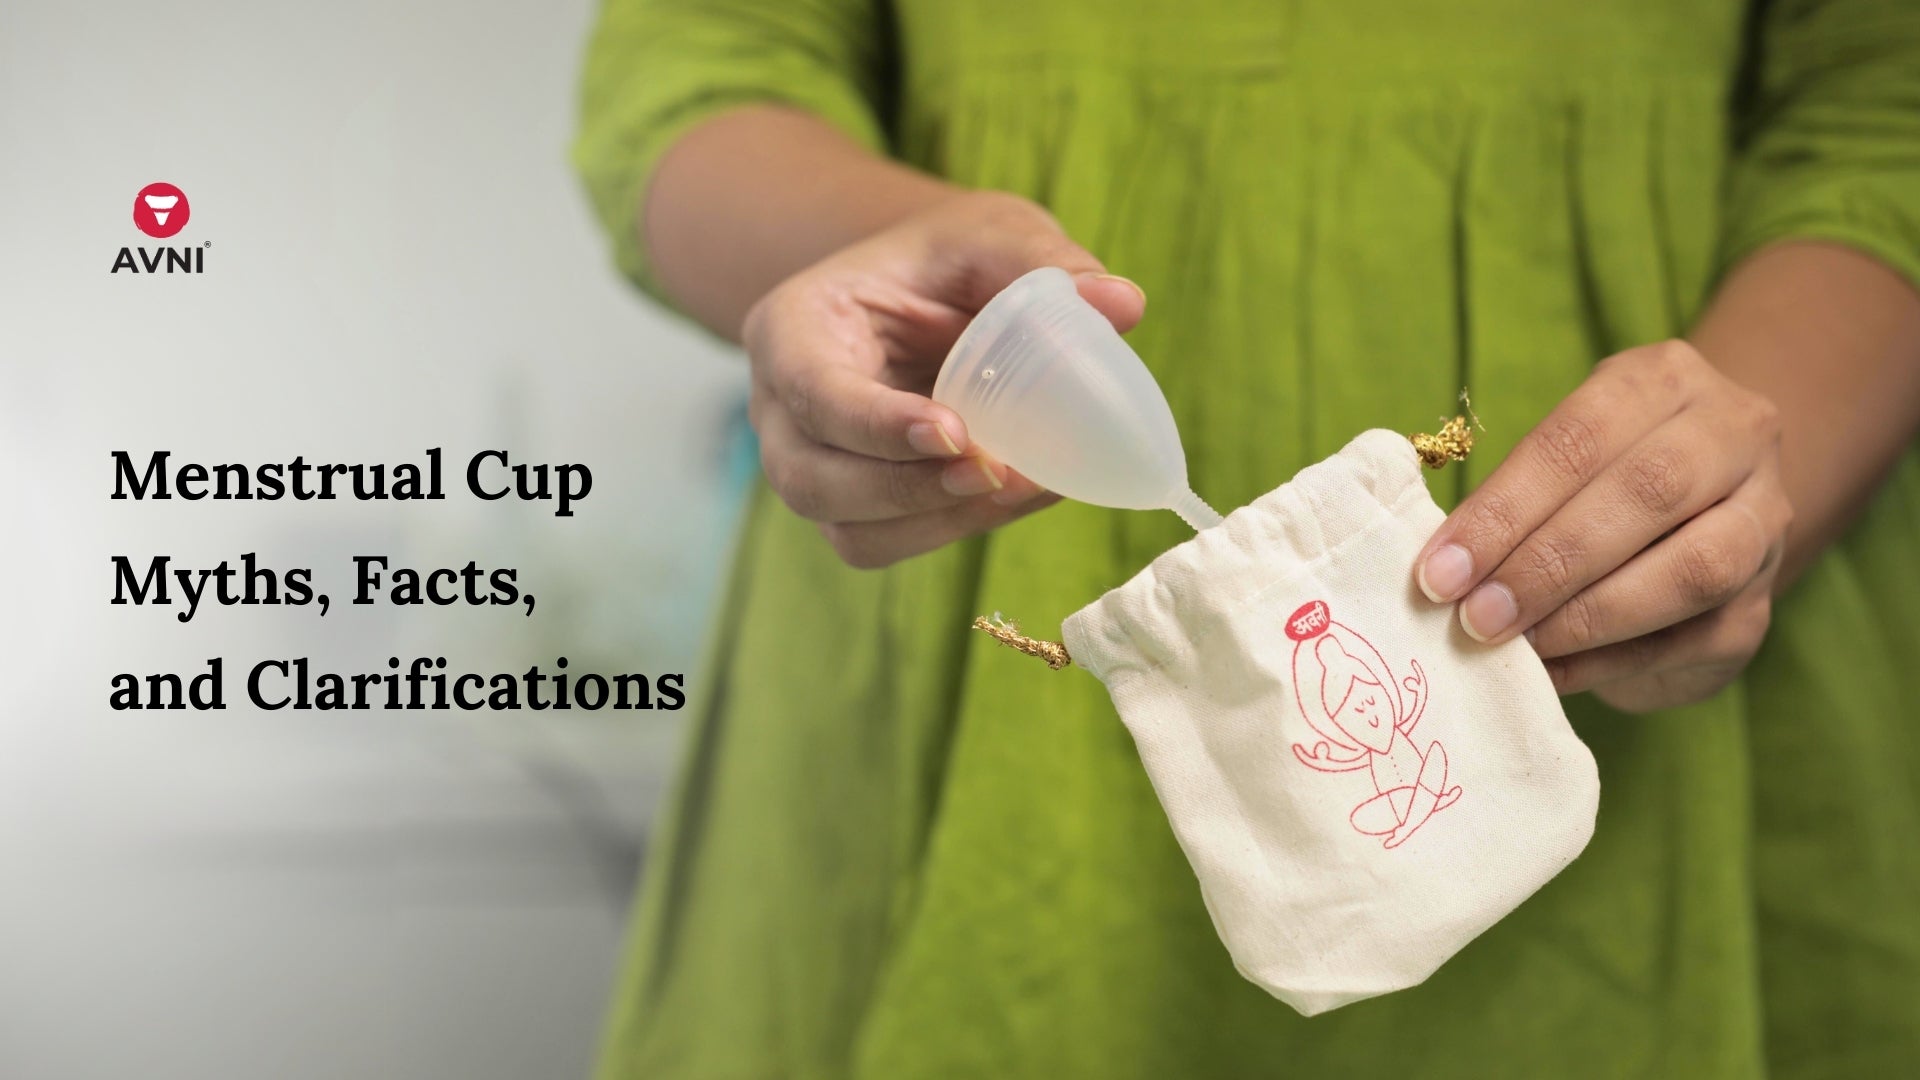 Menstrual Cup Myths, Facts, and Clarifications